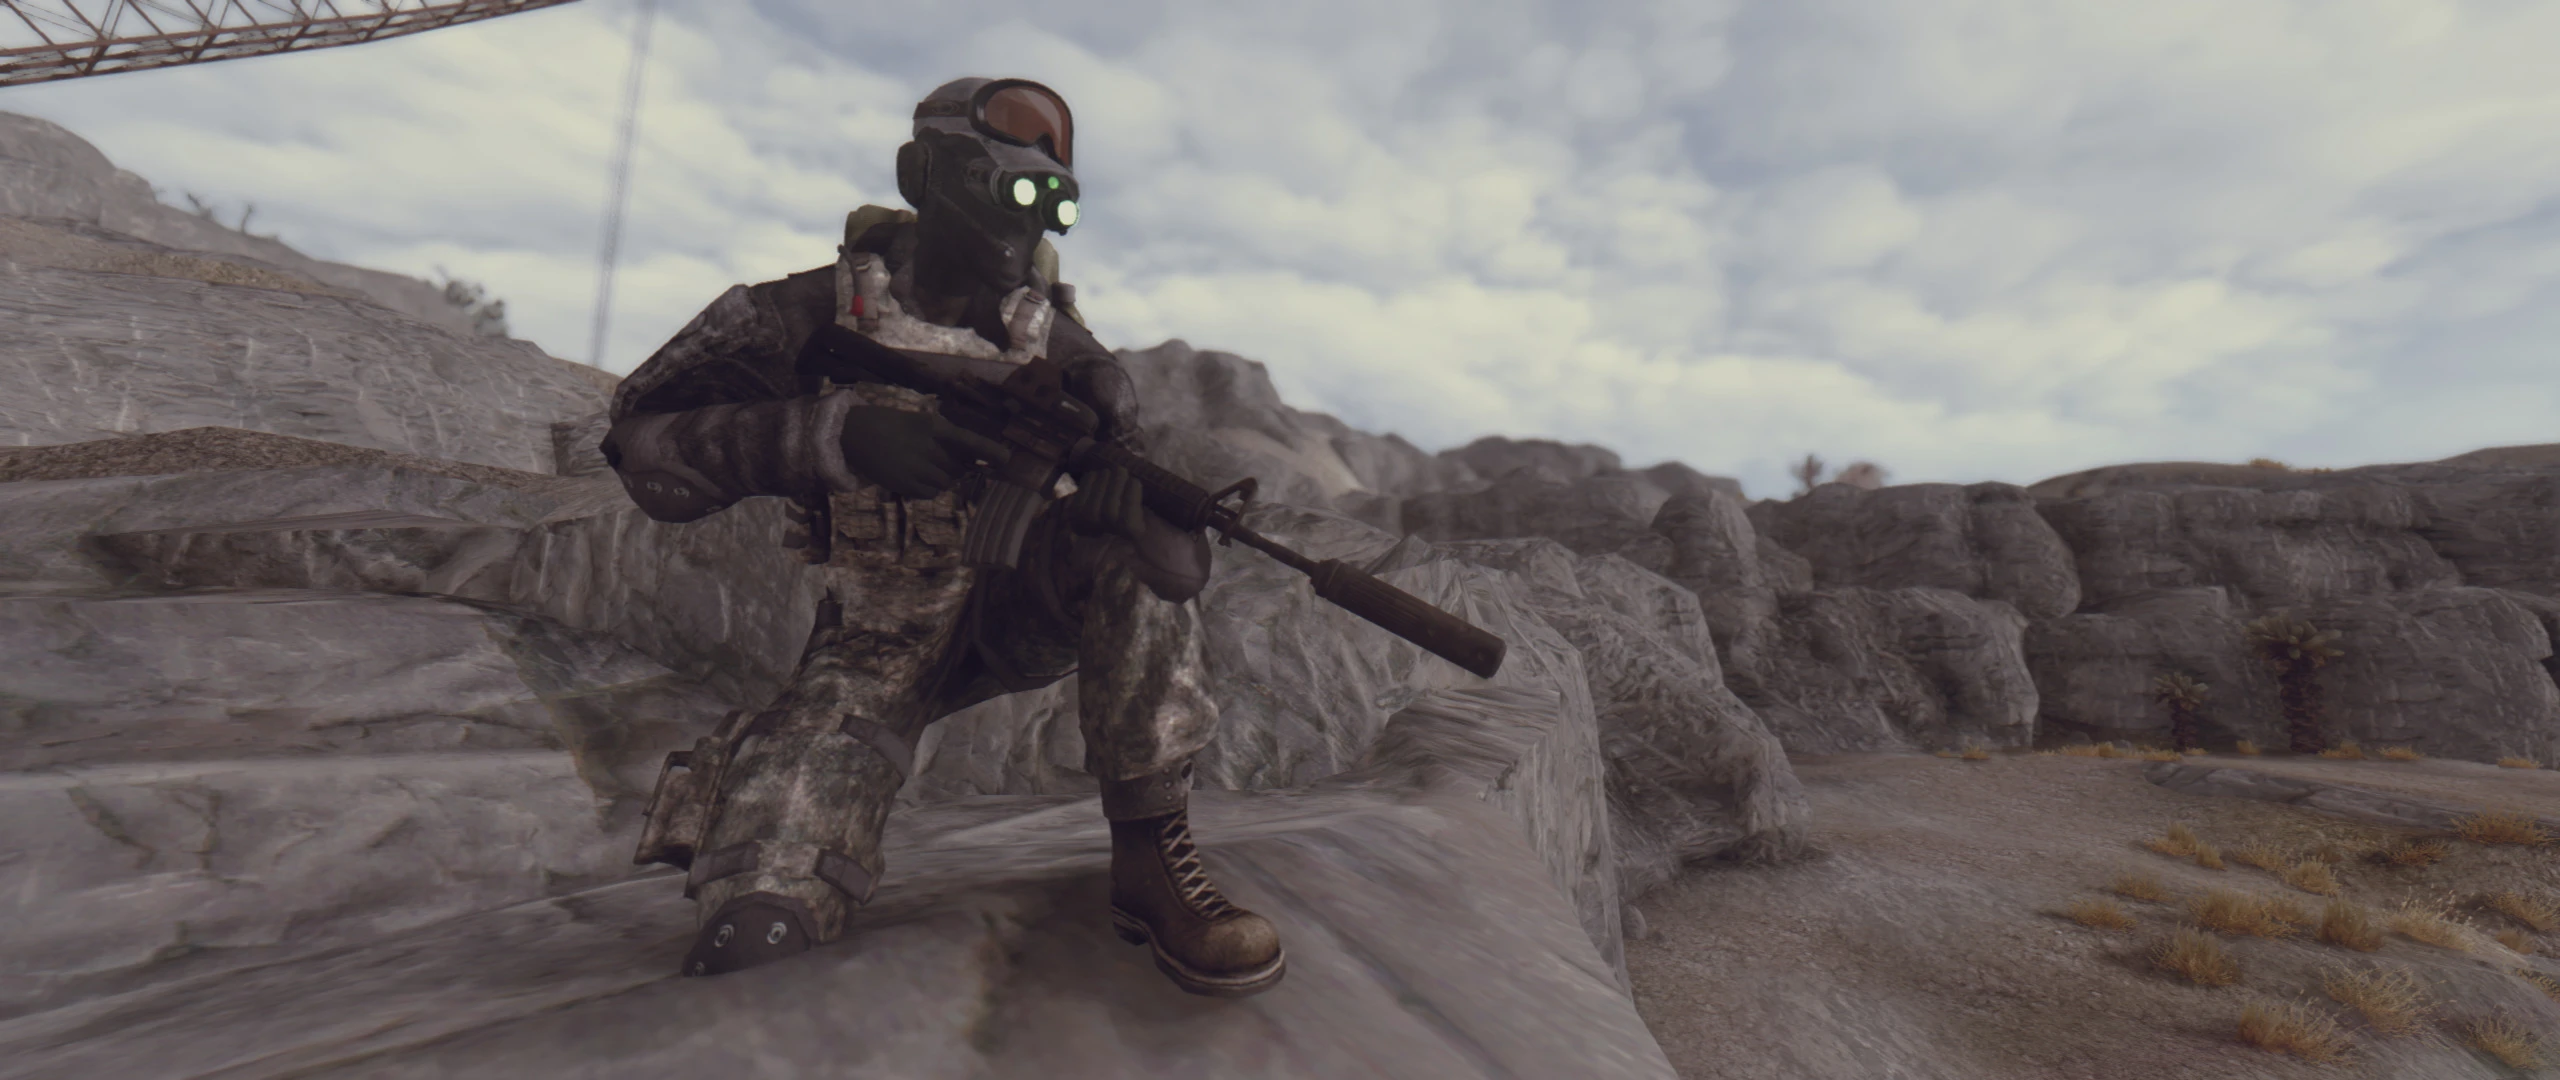 Ghost Recon-Fallout.